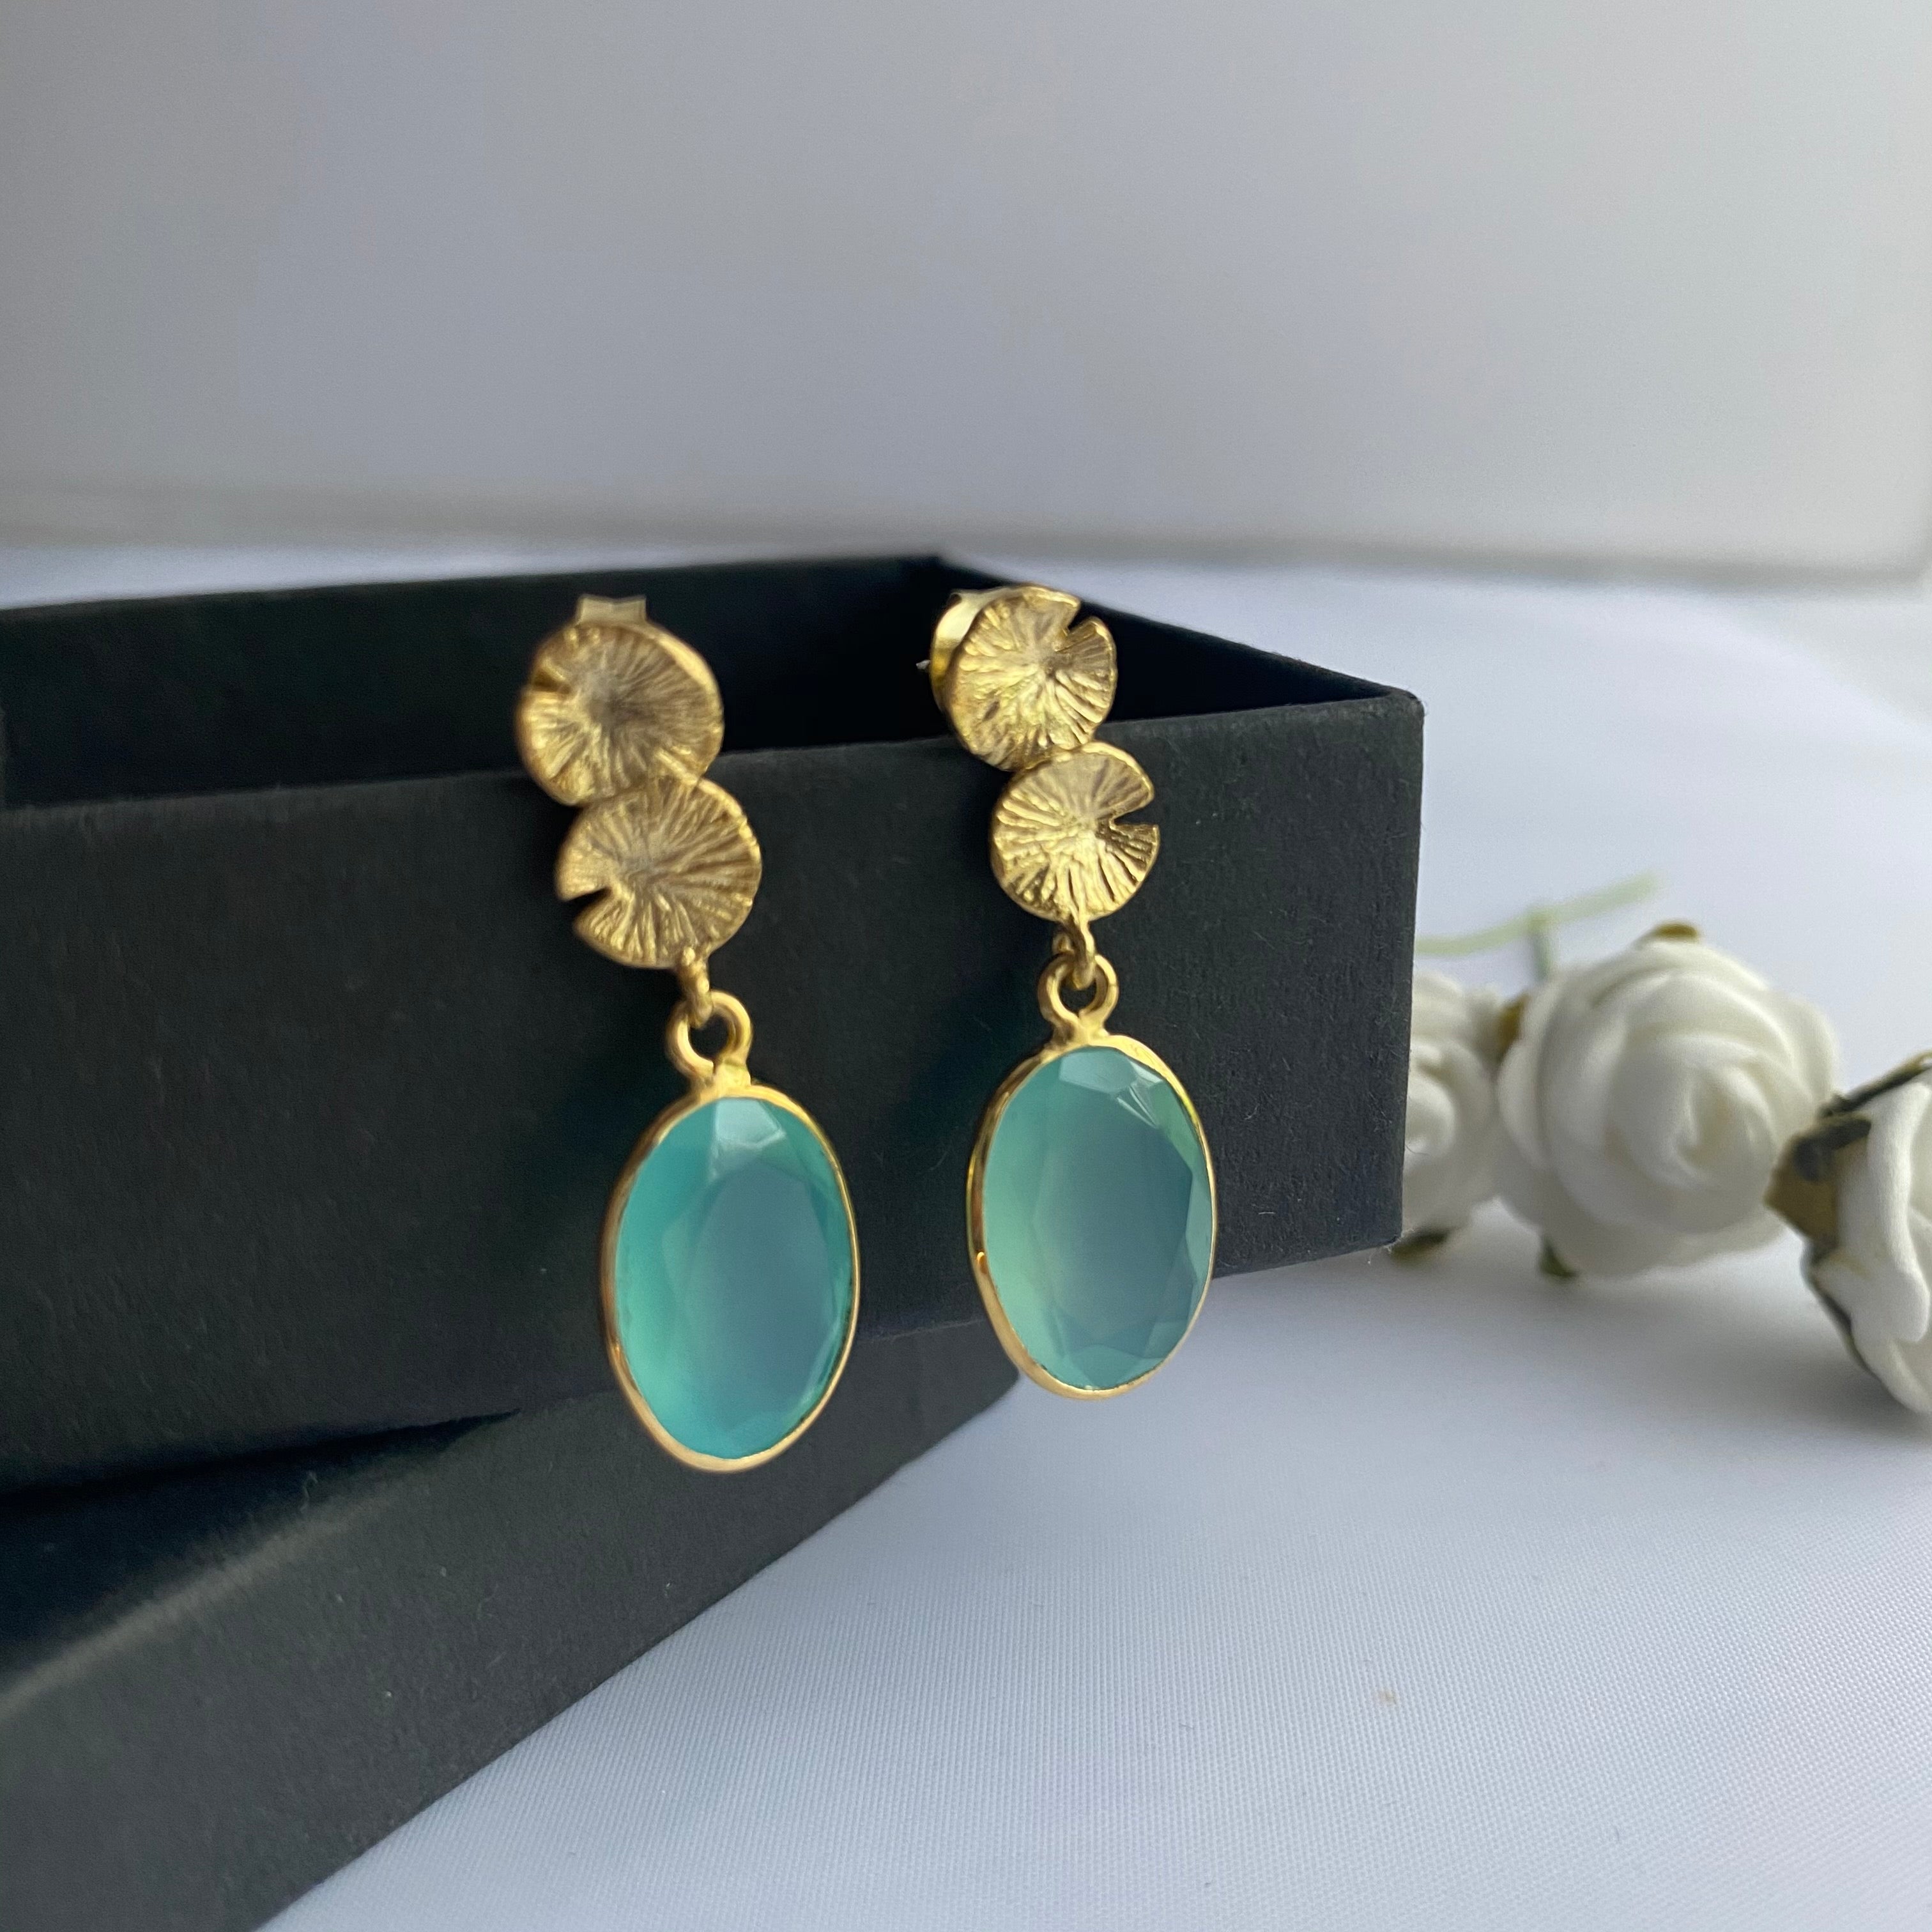 Lily Pad Earrings in Gold Plated Sterling Silver with an Aqua Chalcedony Gemstone Drop